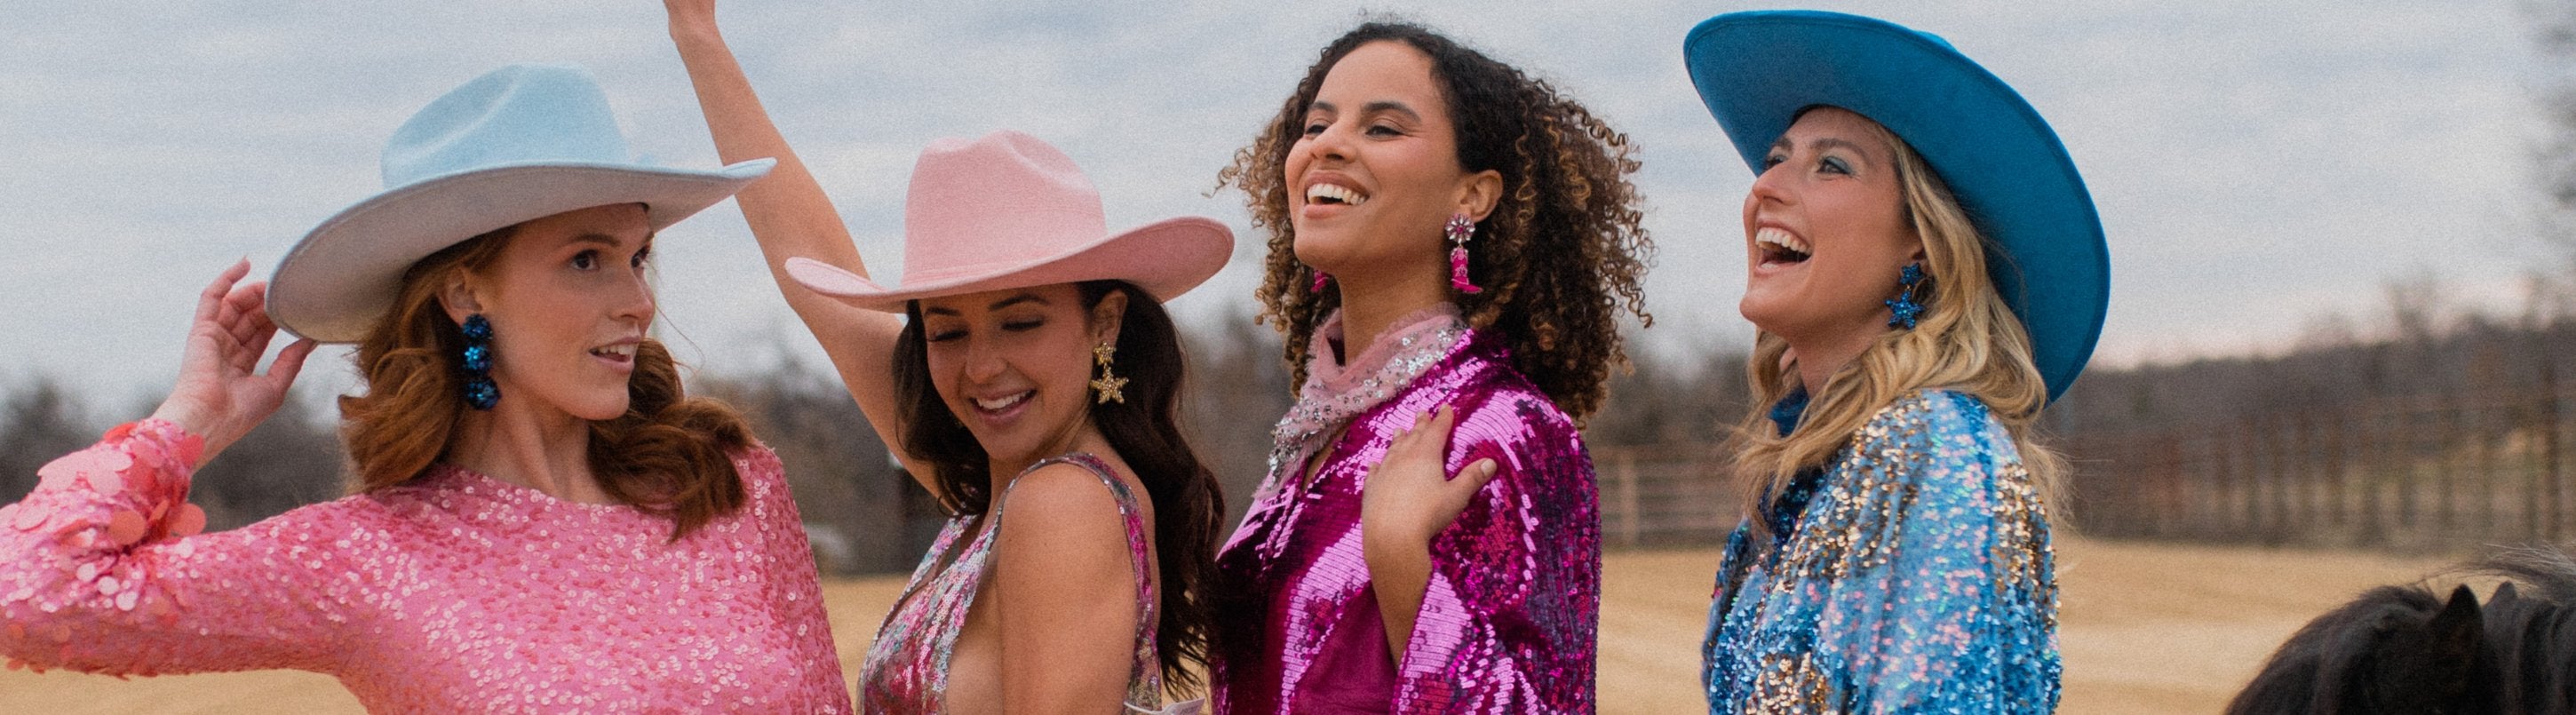 Cosmic Cowgirl: HerStory x Mignonne Gavigan Collection